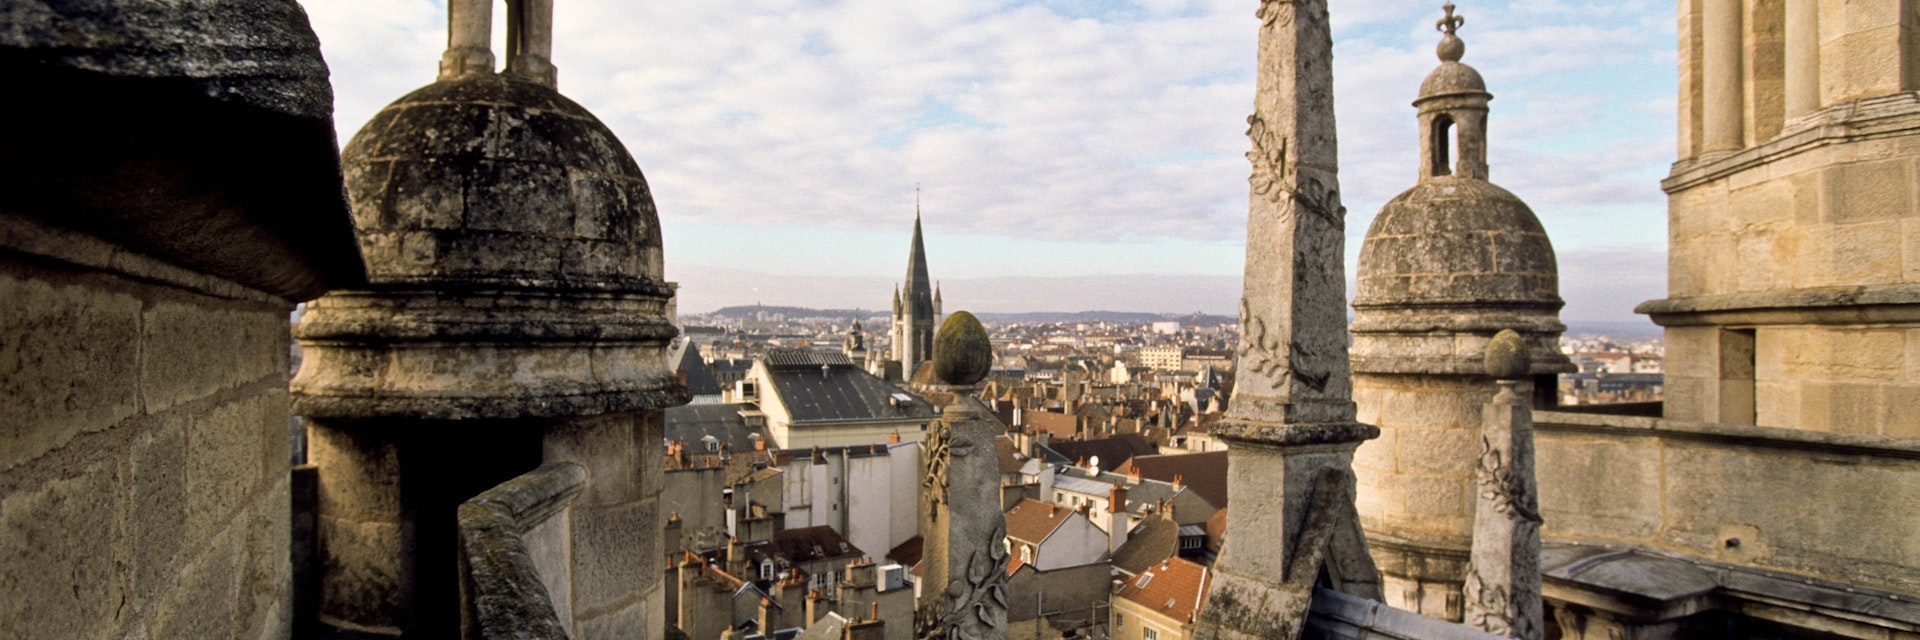 France, Dijon, general view of the historical city center from the rooftop of Saint Michel church